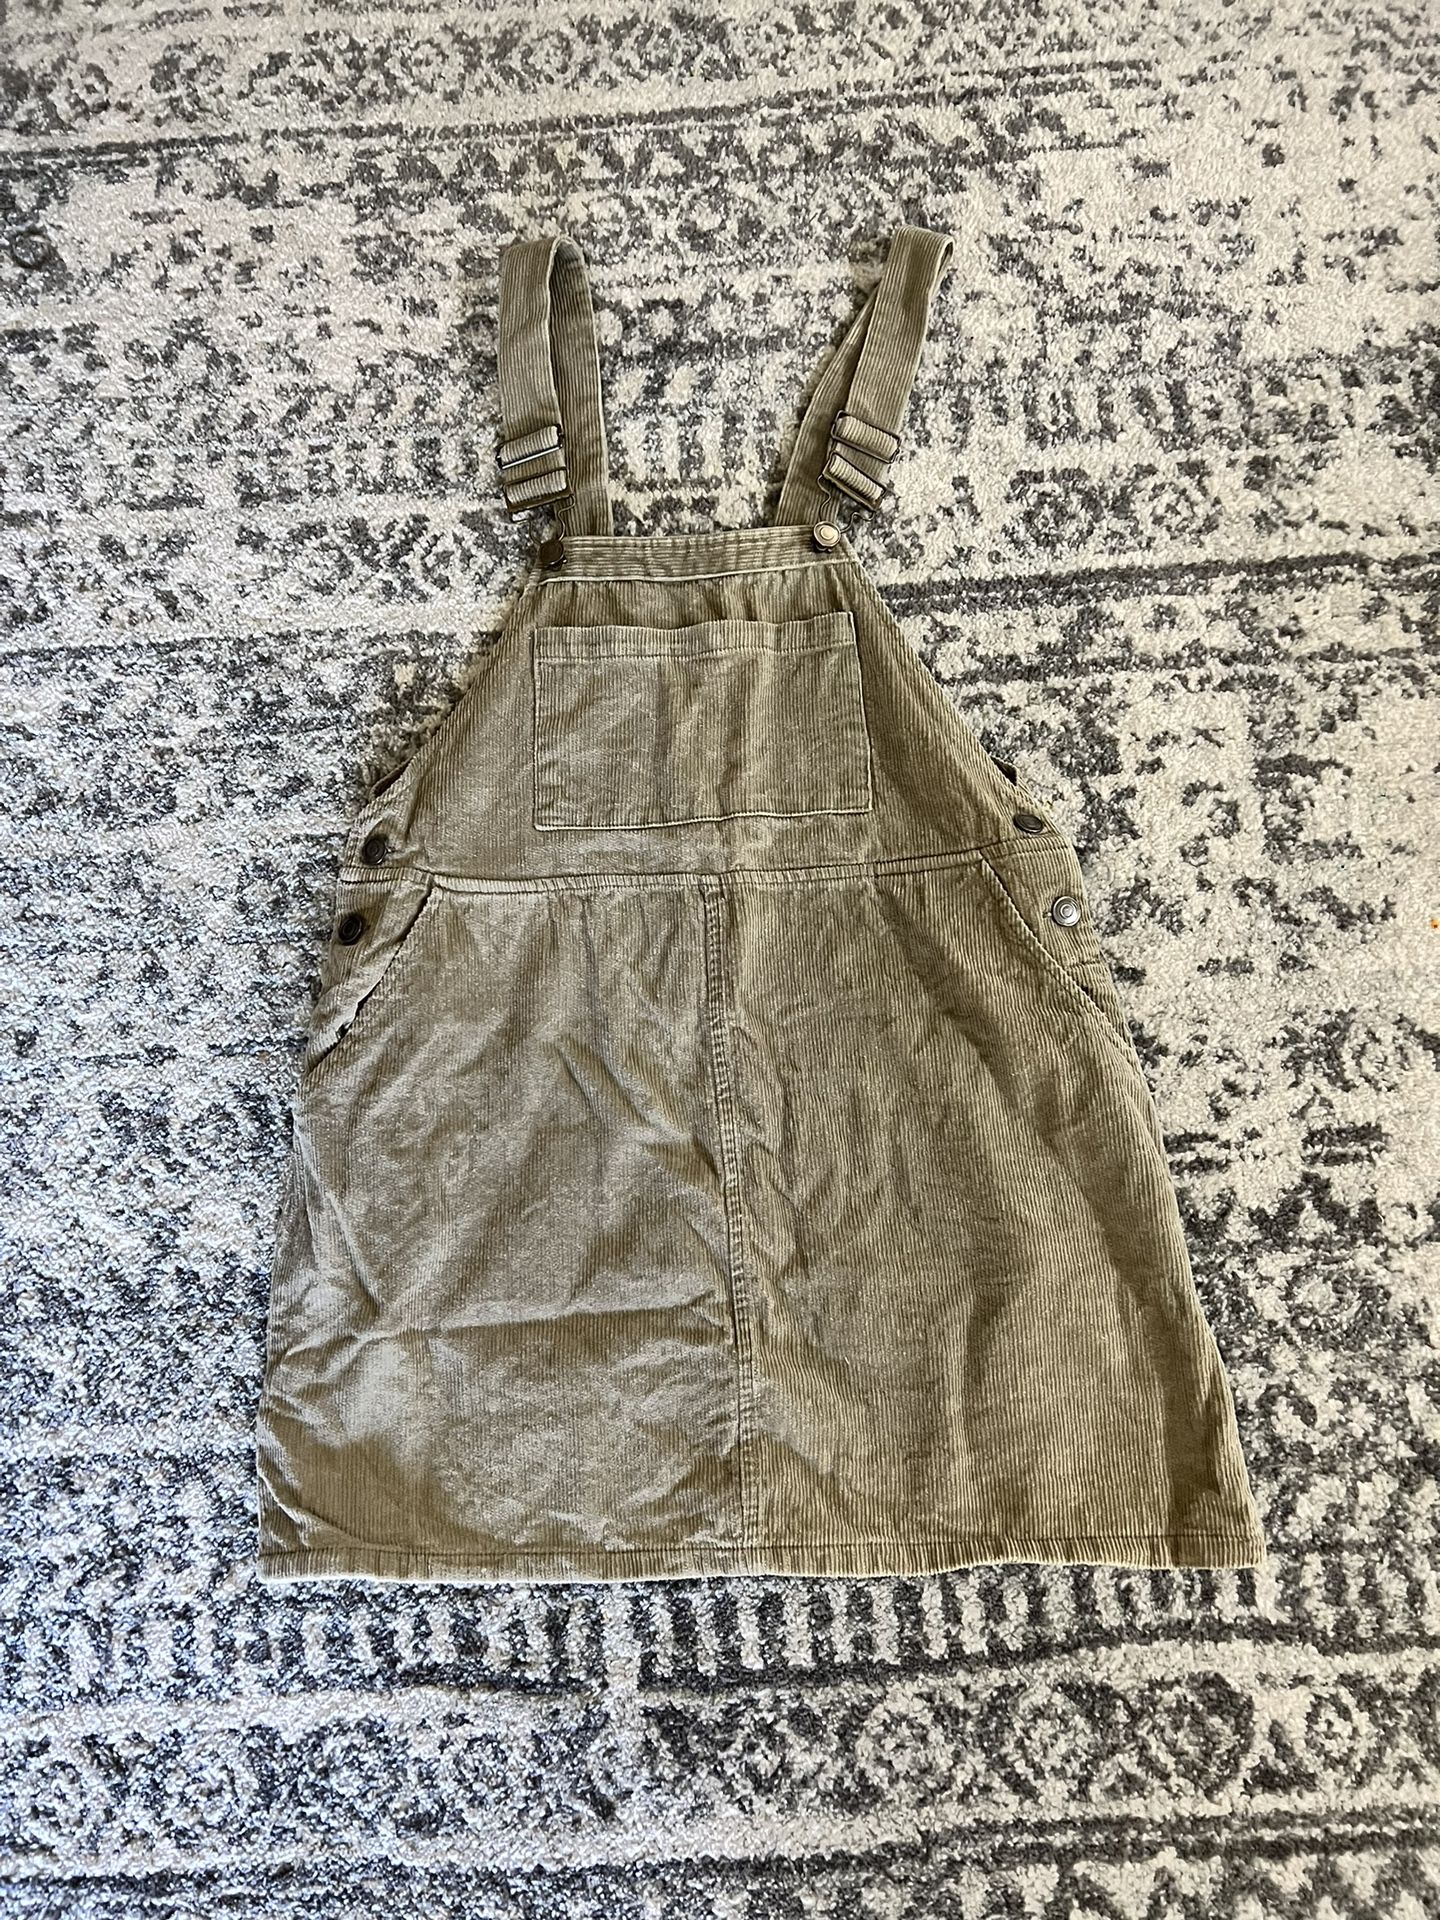 Corduroy Front Pocket Overall Dress (Small)